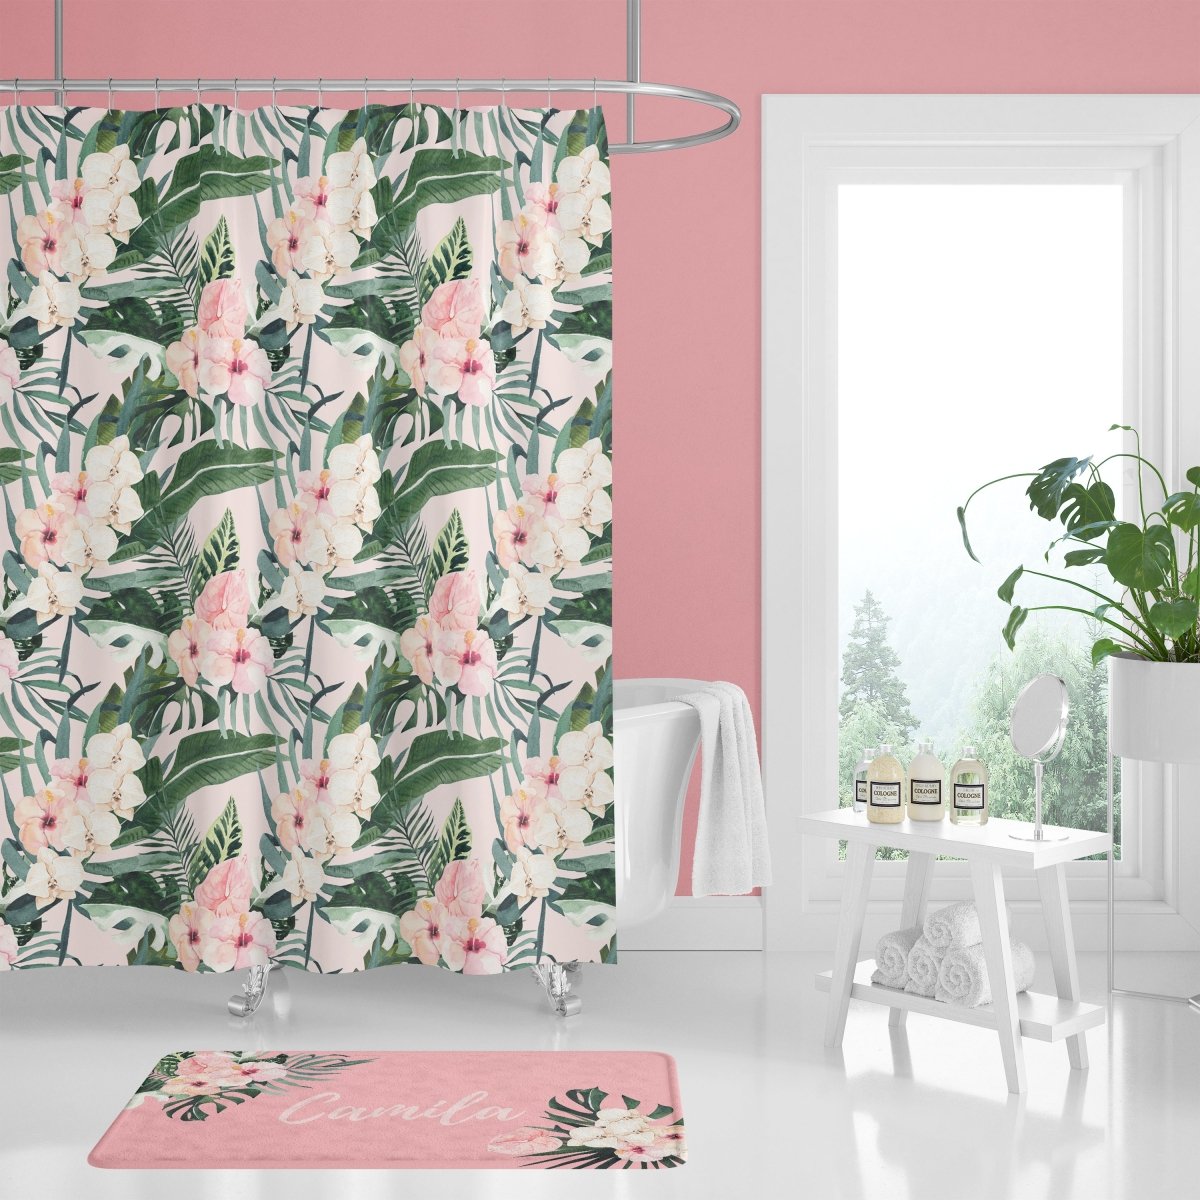 Tropical Floral Bathroom Collection - gender_girl, Theme_Floral, Theme_Tropical